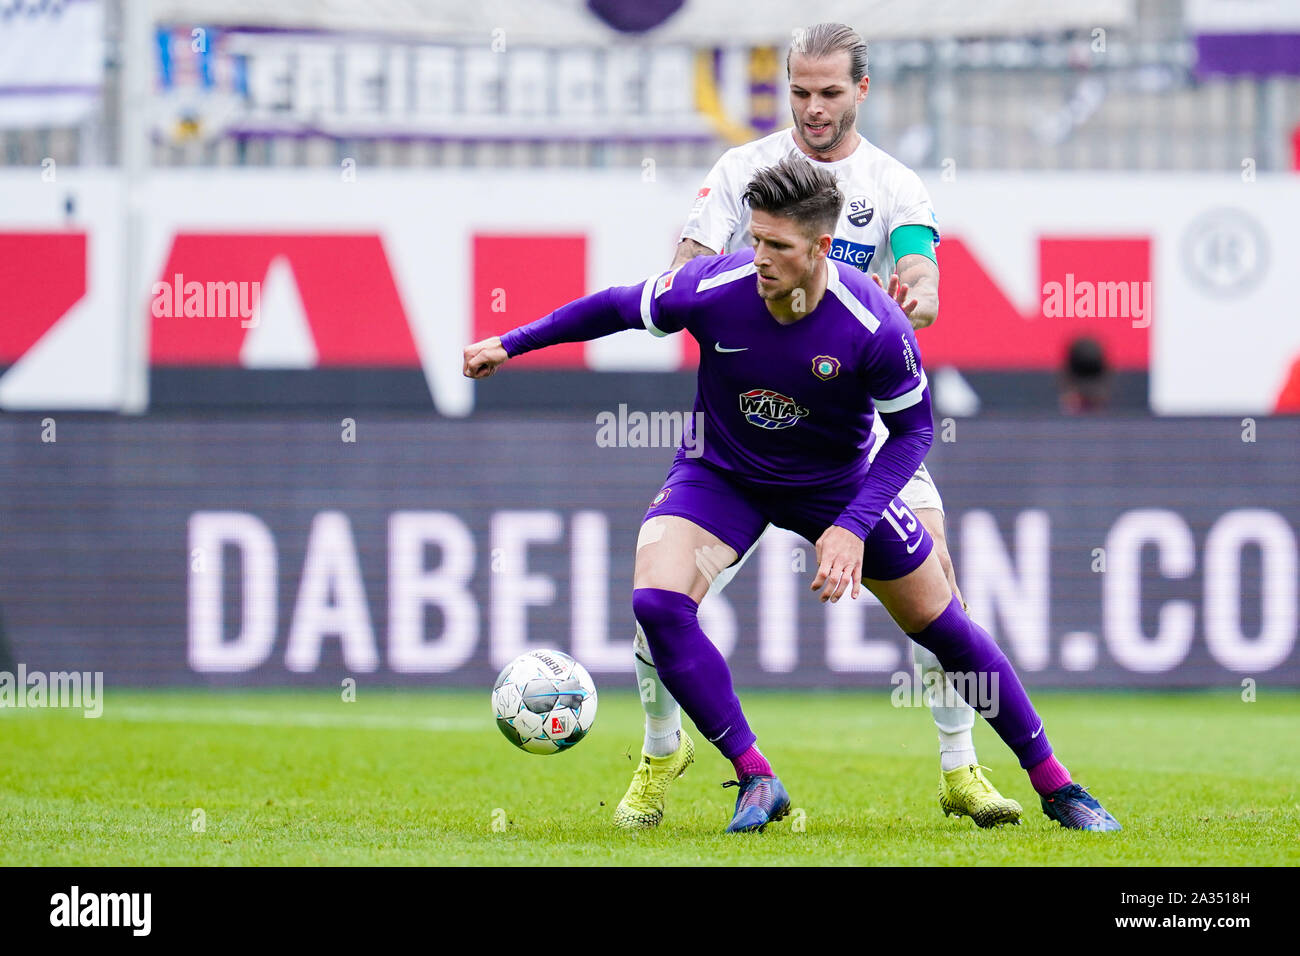 Sandhausen, Germany. 05th Oct, 2019. Soccer: 2nd Bundesliga, SV Sandhausen - Erzgebirge Aue, 9th matchday, in Hardtwaldstadion. Dennis Kempe (front) from Erzgebirge Aue and Sandhausens Dennis Diekmeier fight for the ball. Credit: Uwe Anspach/dpa - IMPORTANT NOTE: In accordance with the requirements of the DFL Deutsche Fußball Liga or the DFB Deutscher Fußball-Bund, it is prohibited to use or have used photographs taken in the stadium and/or the match in the form of sequence images and/or video-like photo sequences./dpa/Alamy Live News Stock Photo